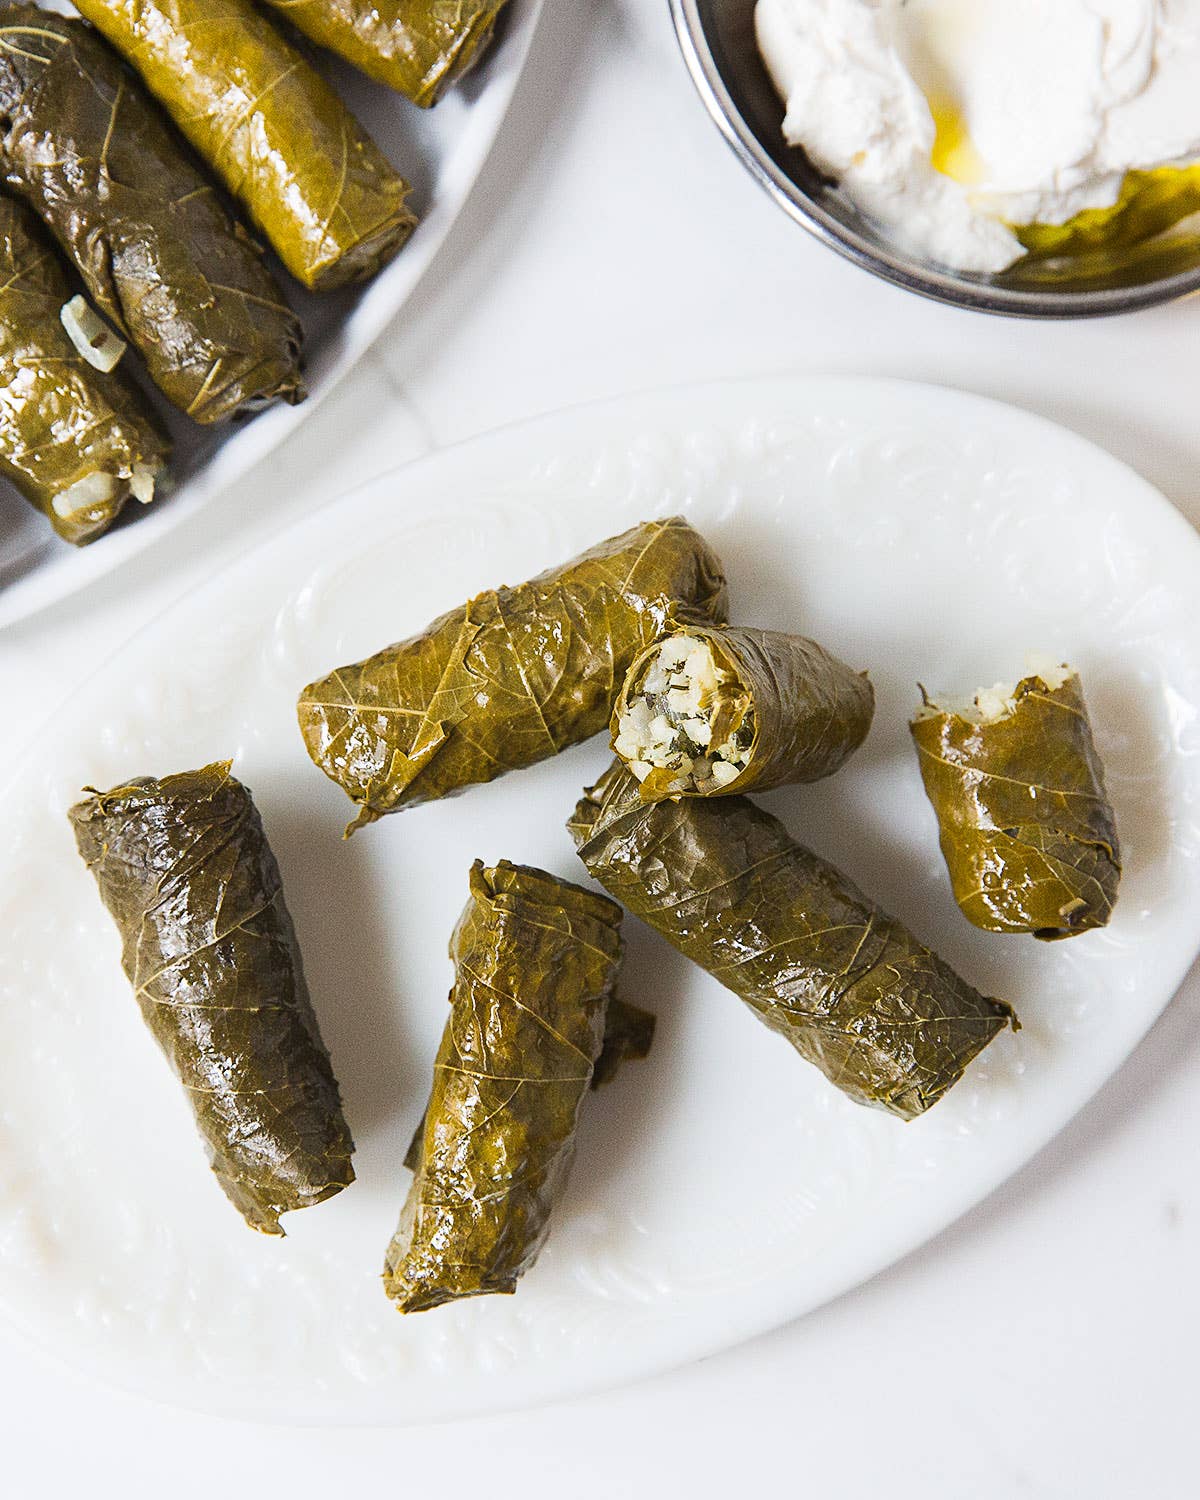 How to Make Your Own Dolmas (Stuffed Grape Leaves) for Perfect Mezze Plates